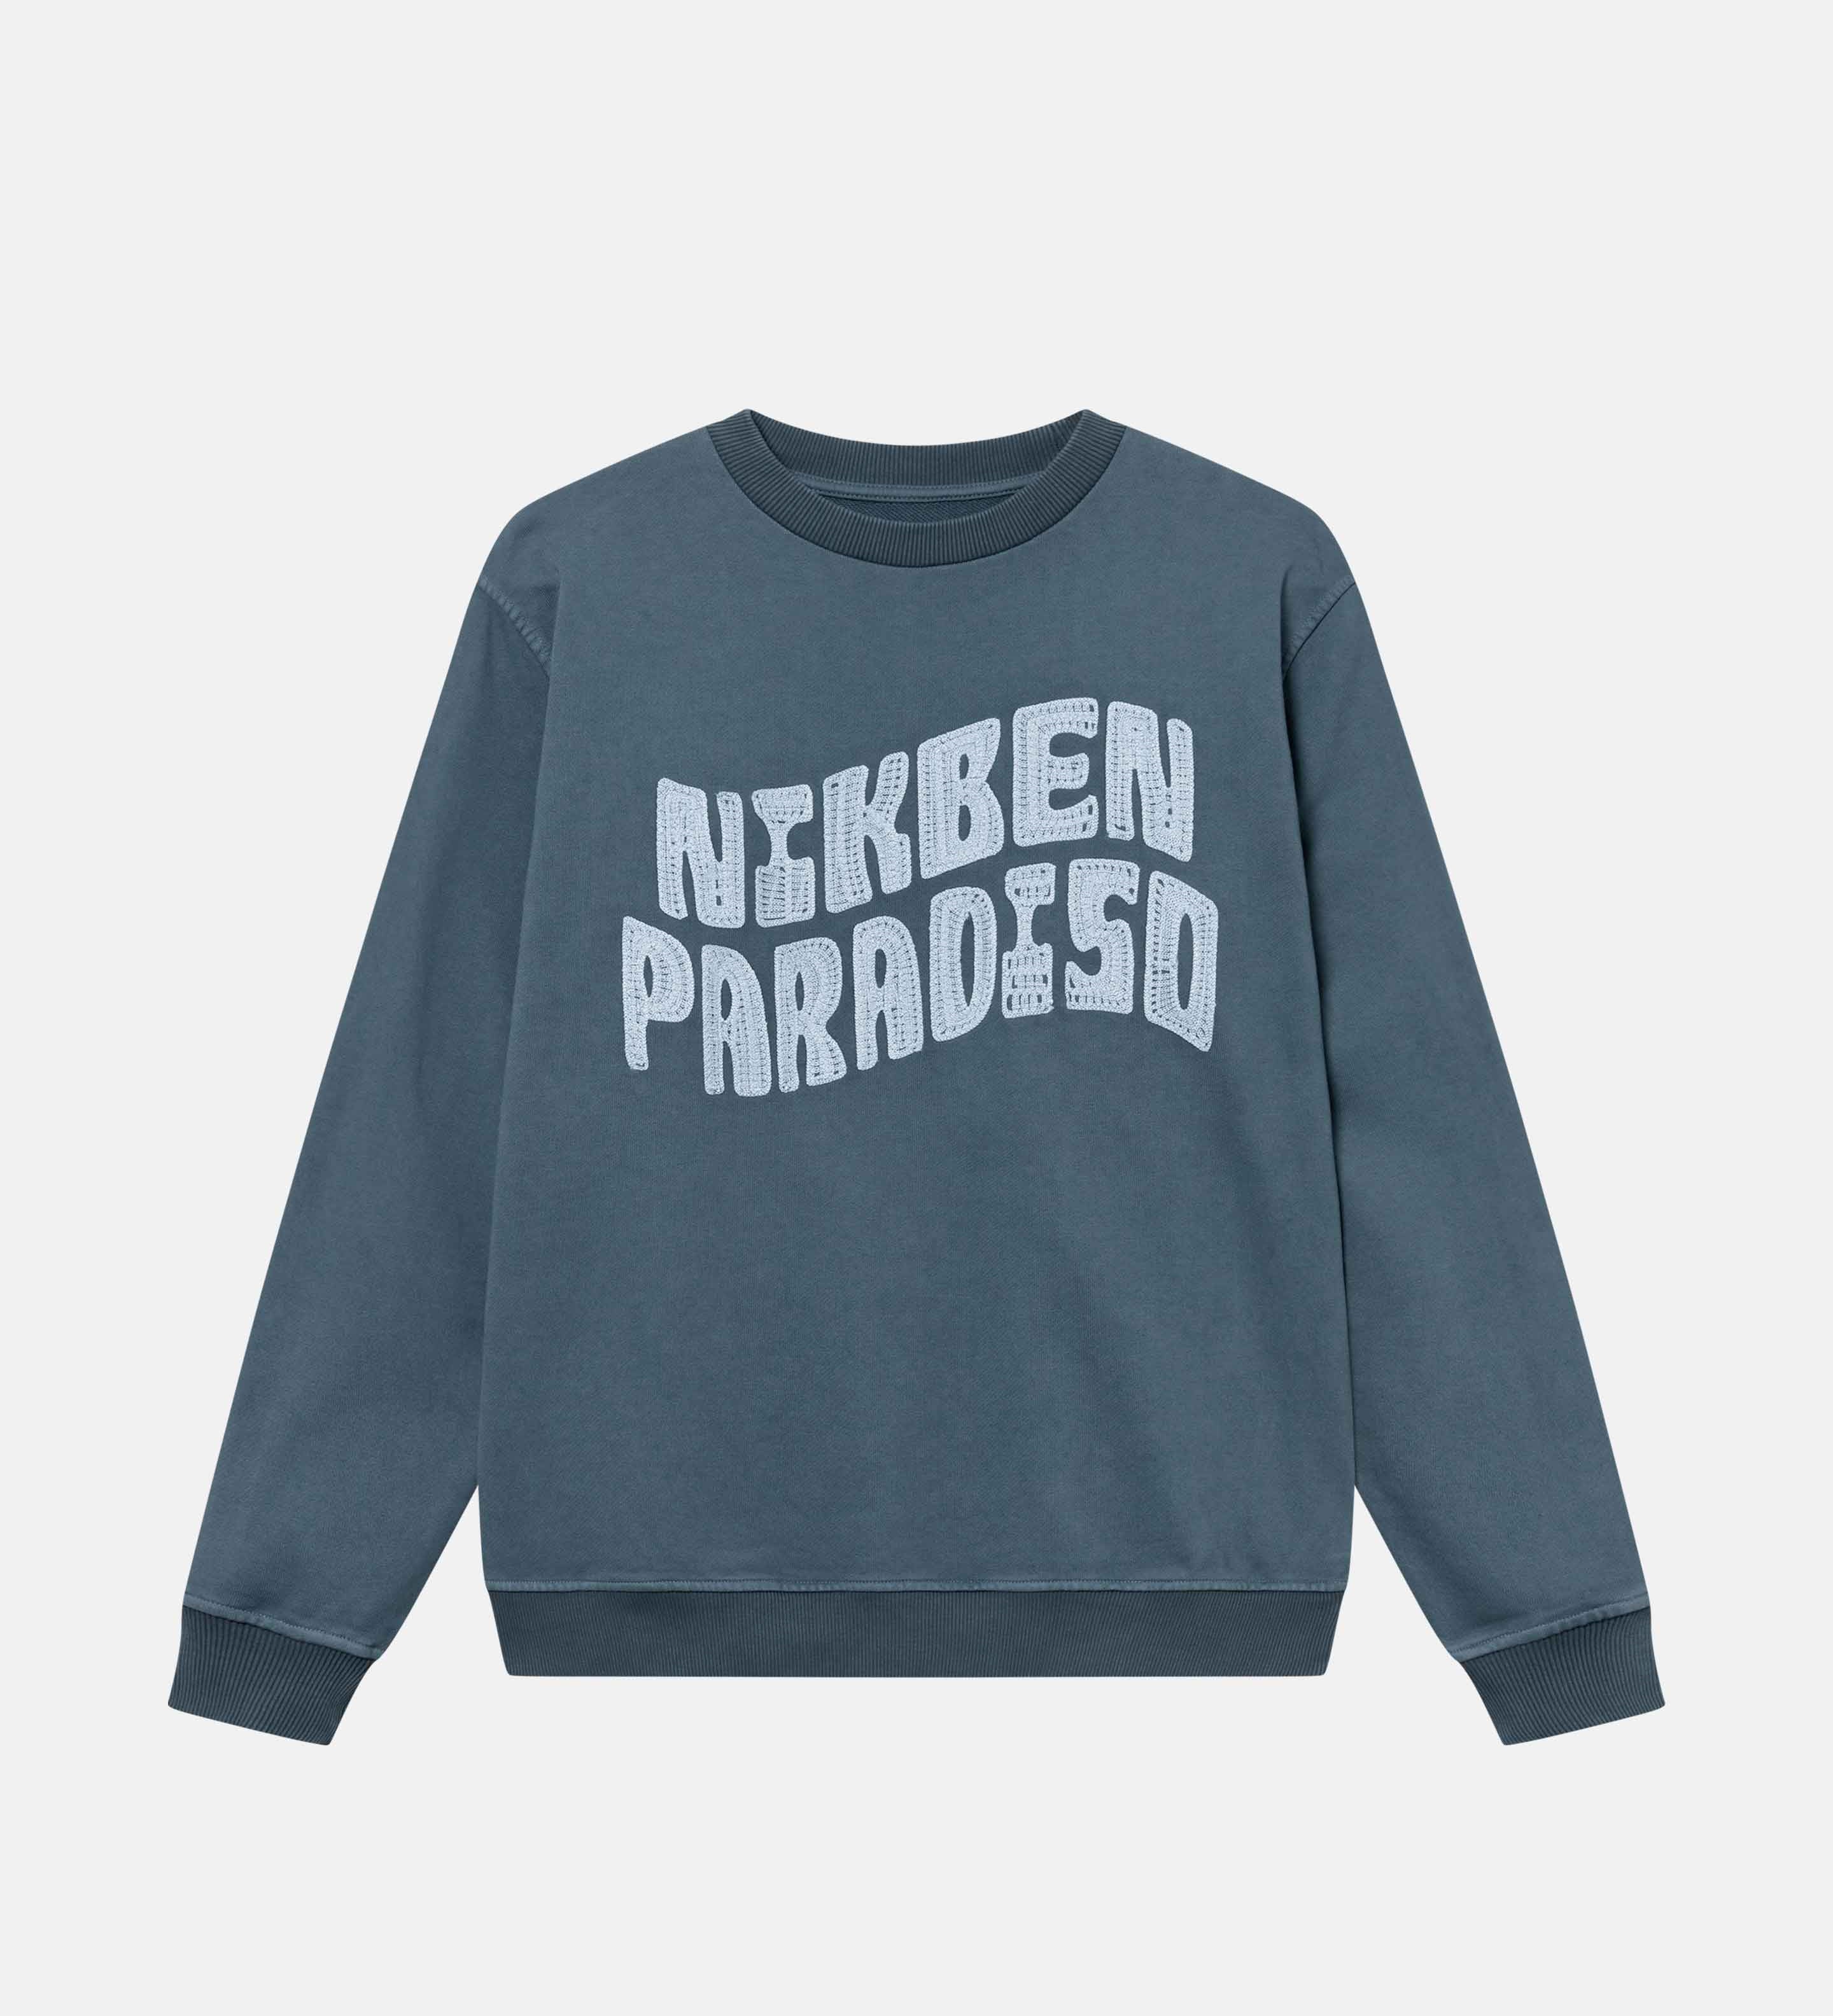 An anthracite sweatshirt with a "Nikben Paradiso" embroidery on its chest